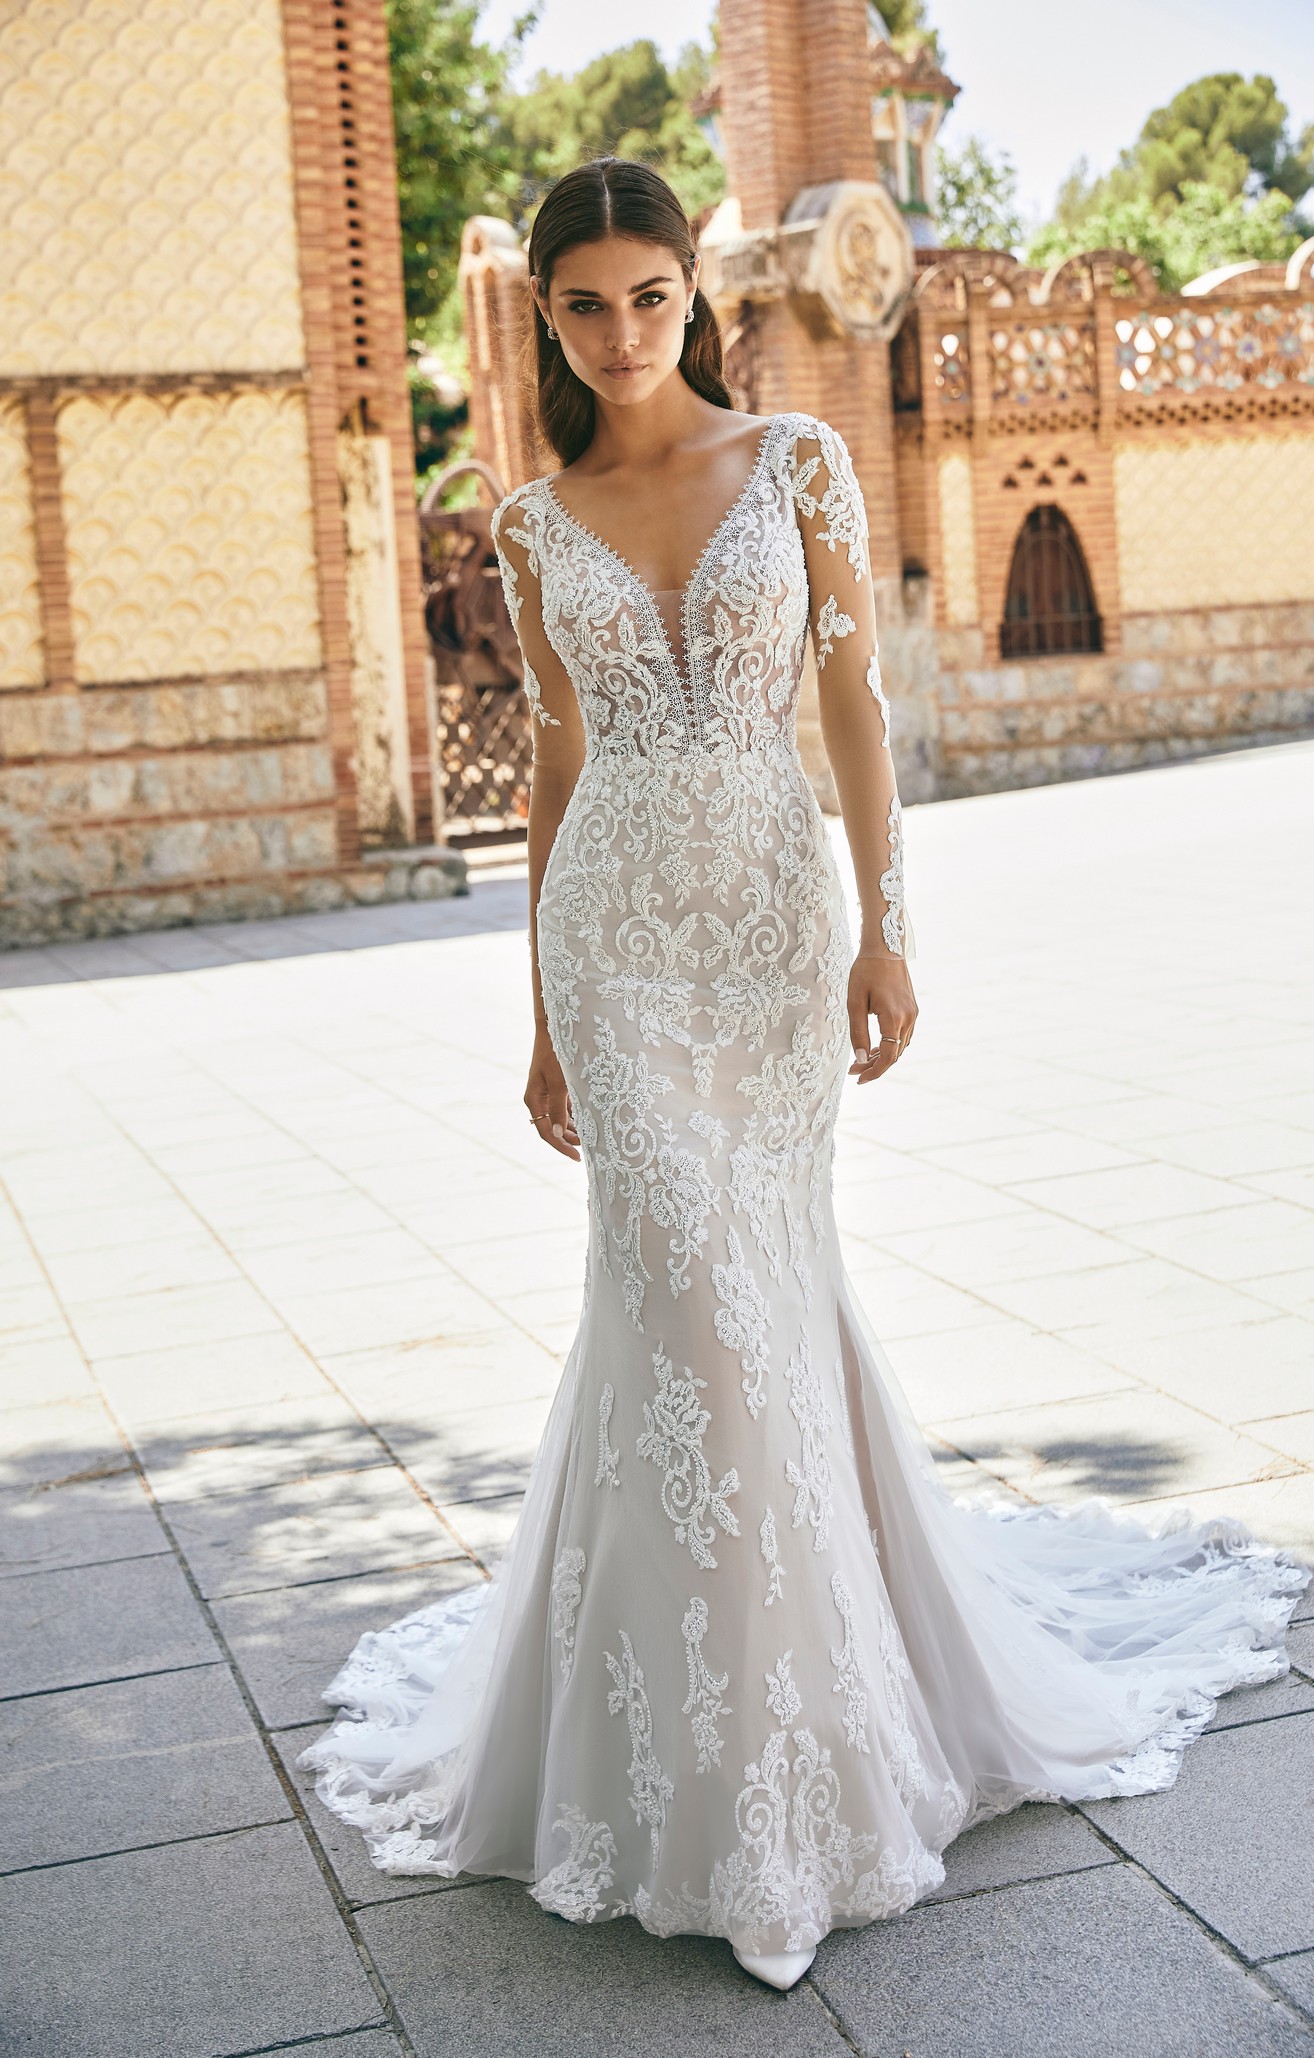 Brown haired woman wearing long sleeve lace wedding dress 